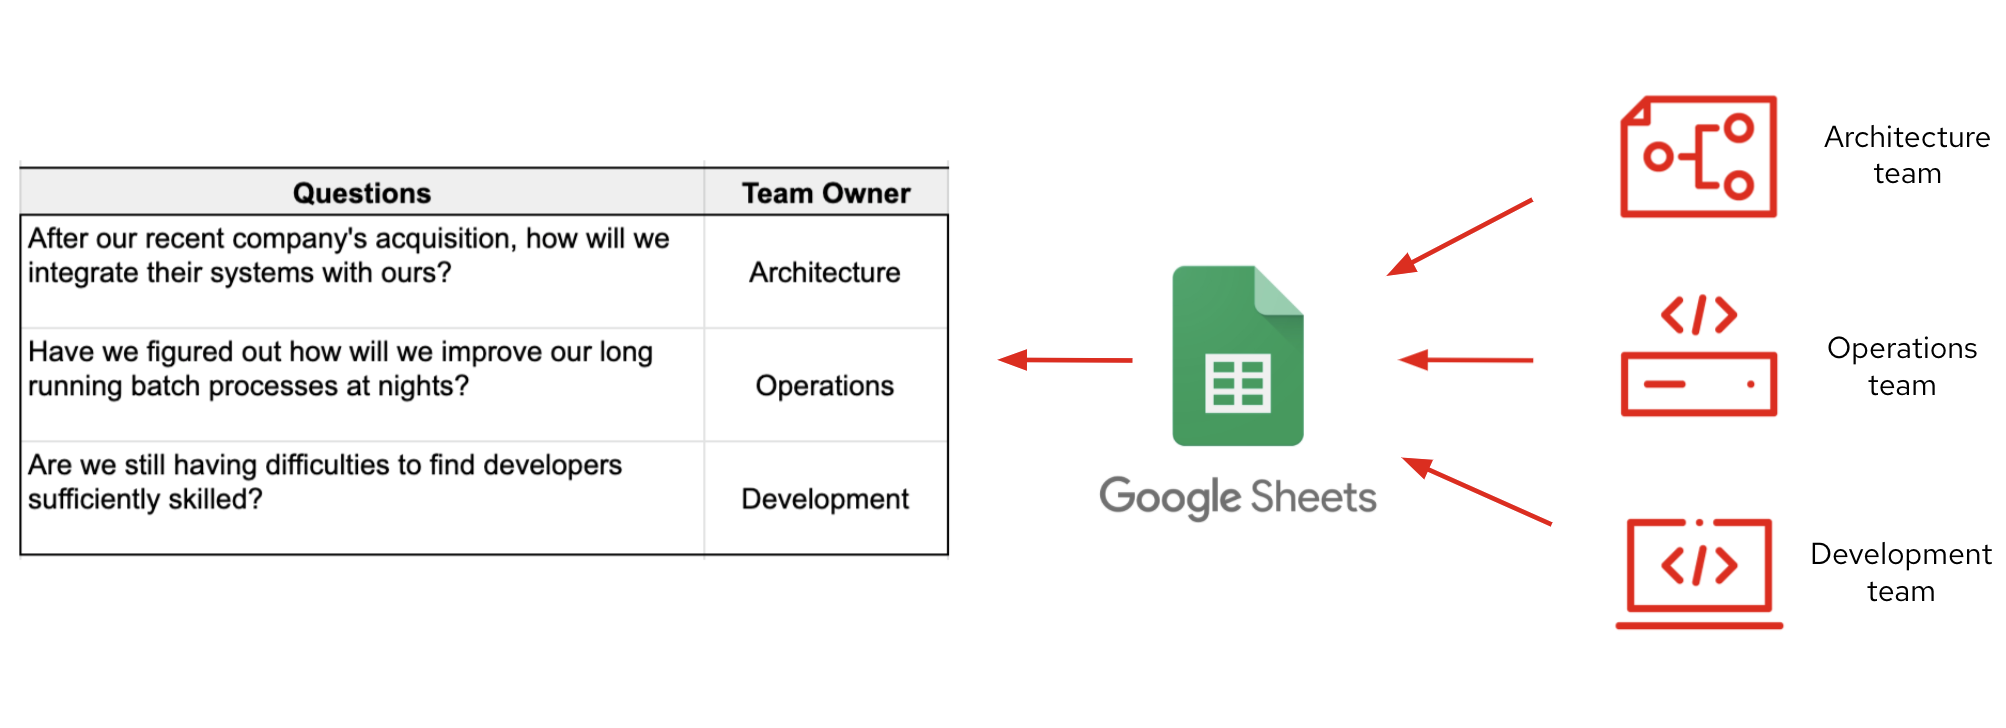 When other teams provide answers they are automatically inserted into the Google spreadsheet.